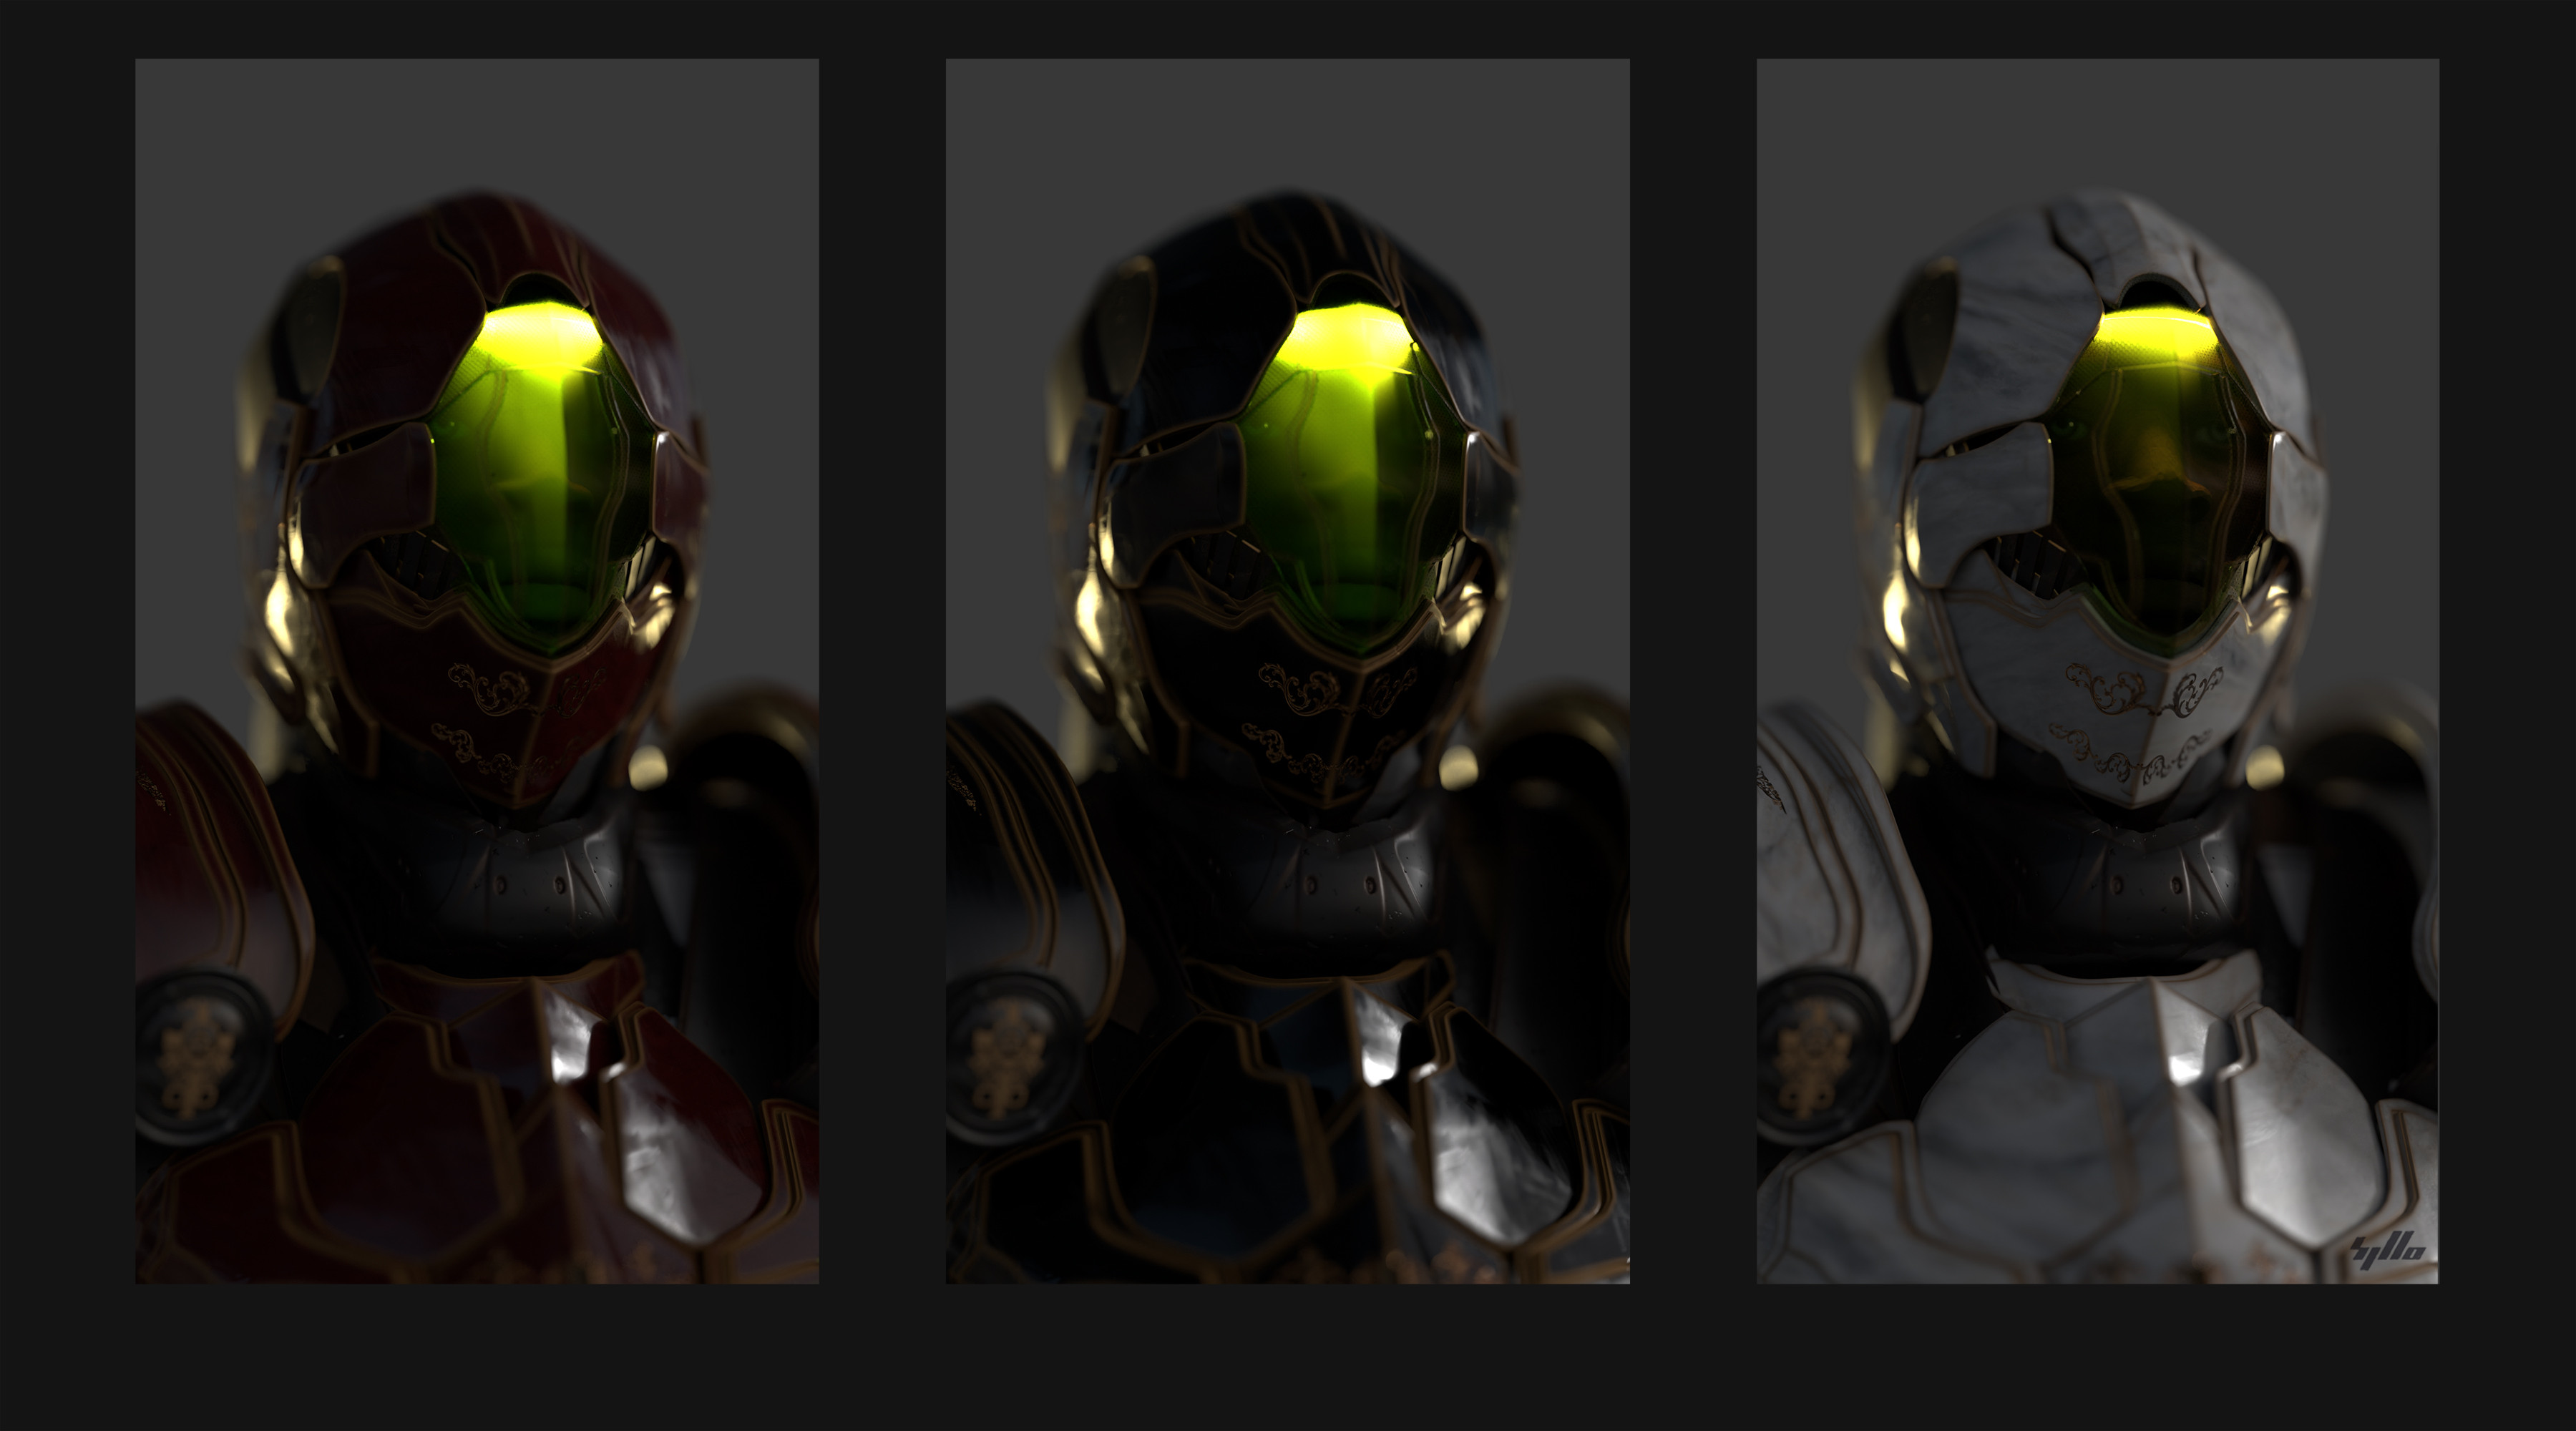 Bust and suit colo variants for Gregorius